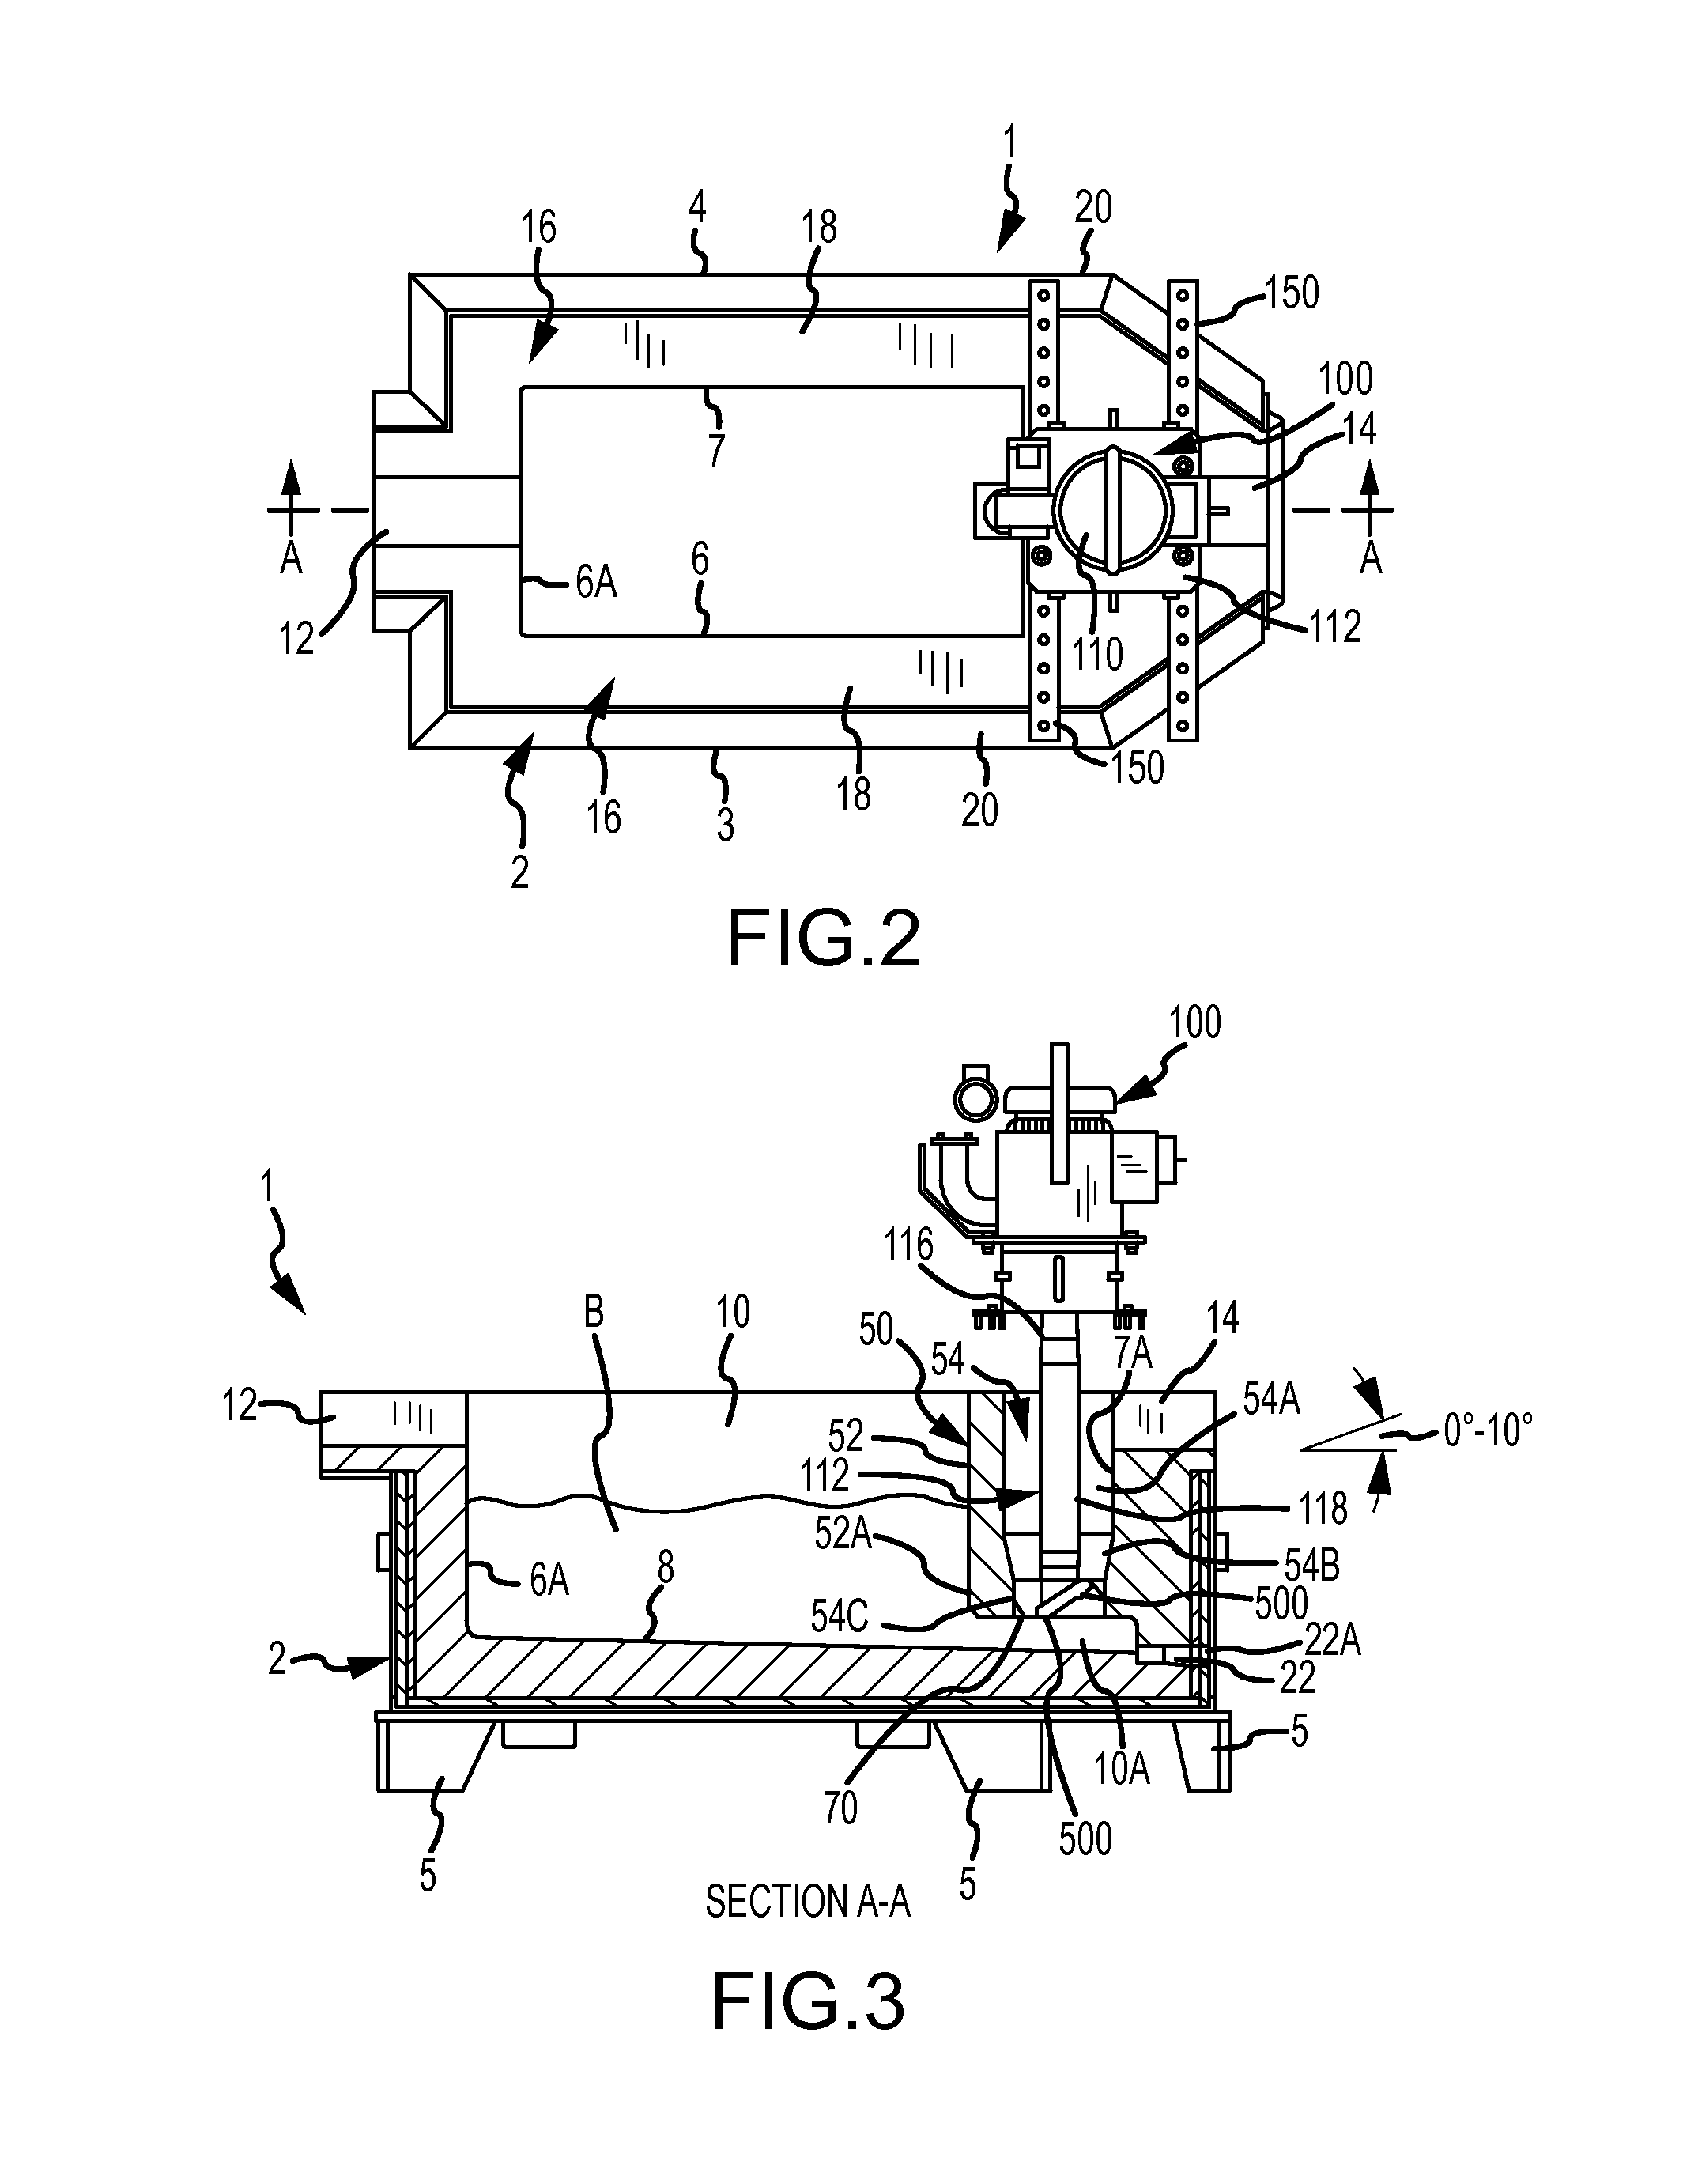 Molten metal transfer system and rotor